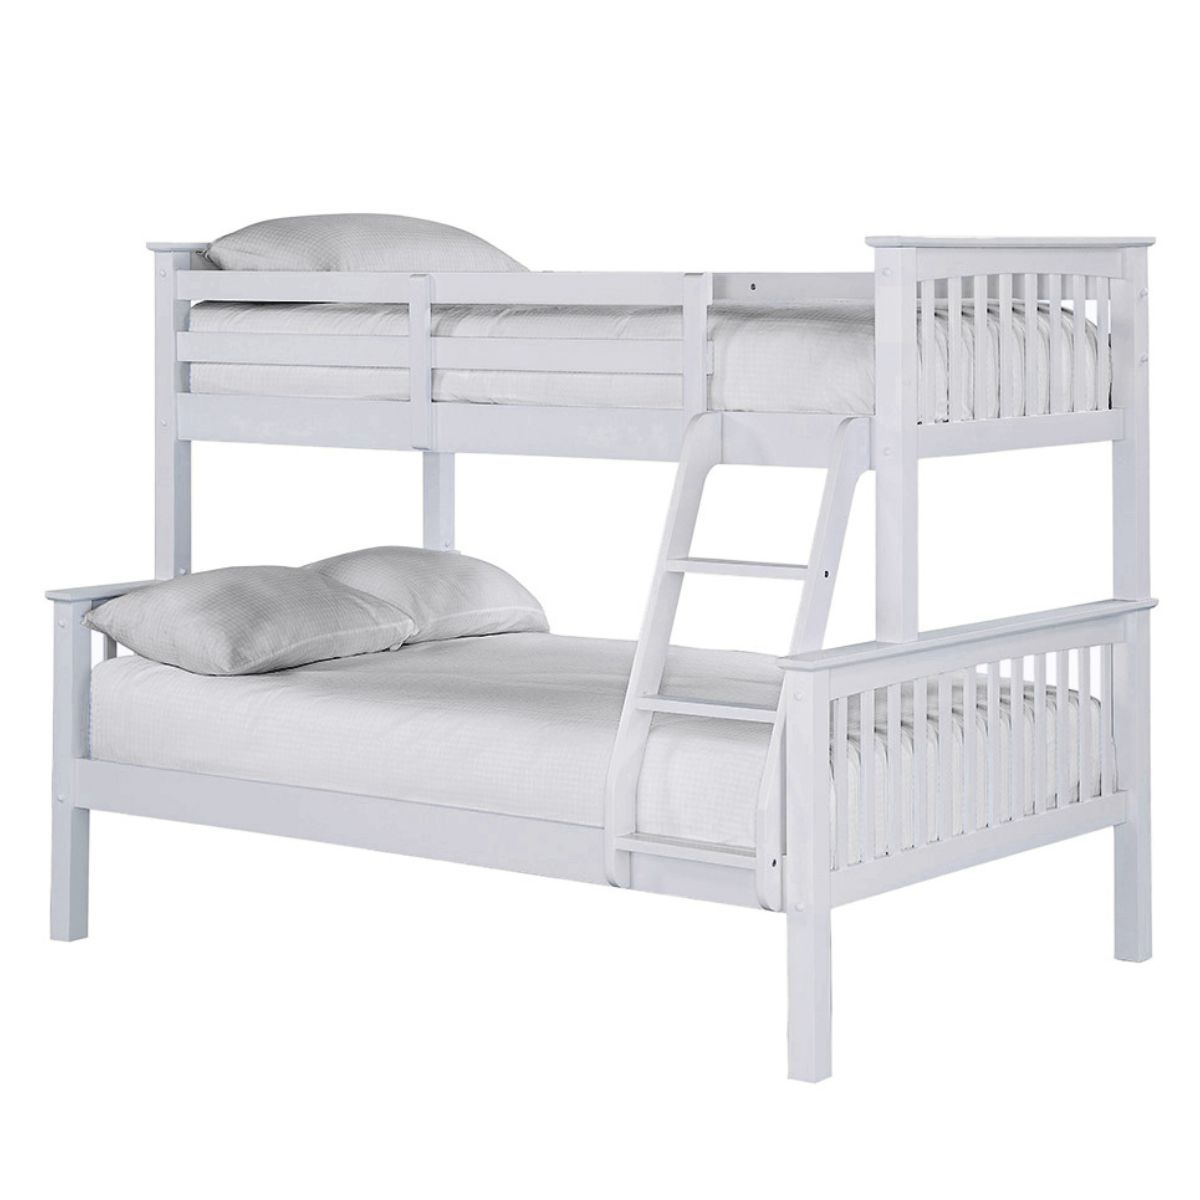 Briggs Single over Double Bunk Bed White - 1